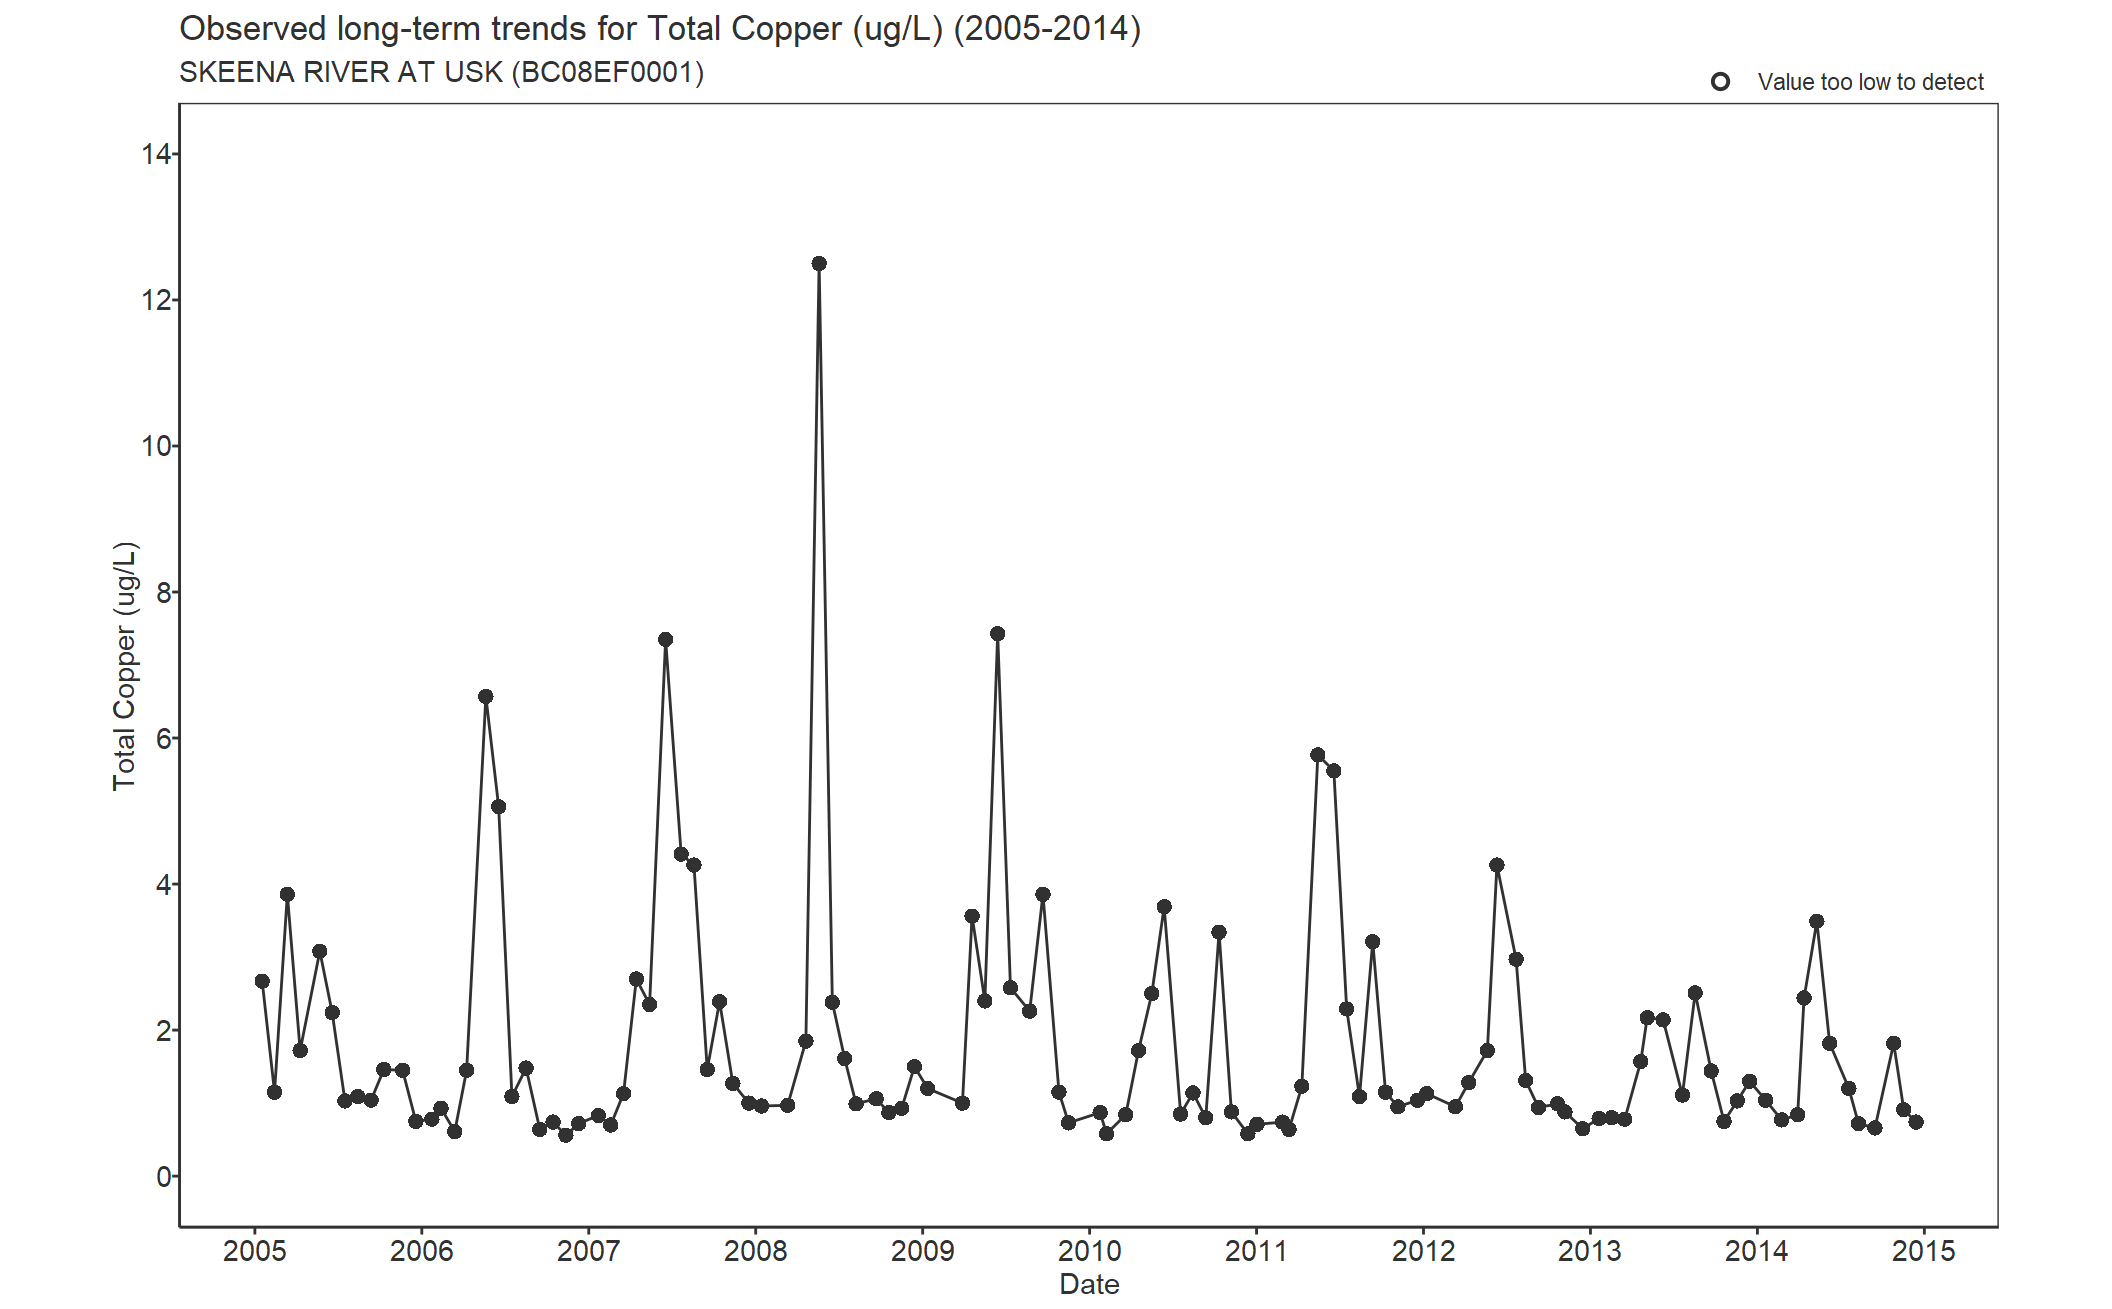 Observed long-term trends for Total Copper (2005-2014)